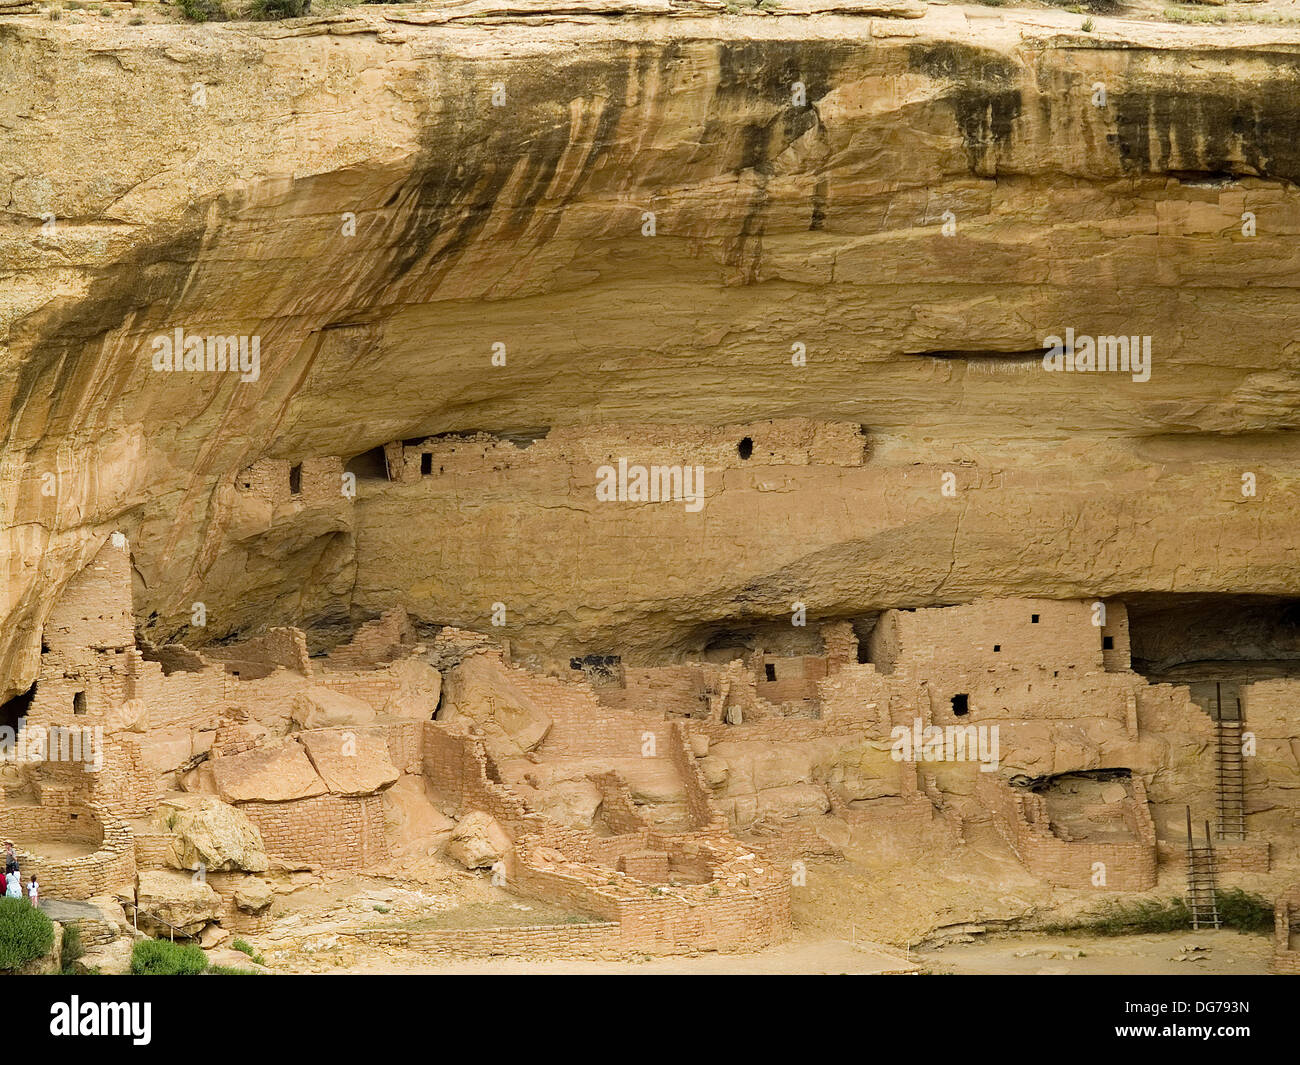 The Anasazi dwelling of Long House in Mesa Verde National Park,Colorado Stock Photo